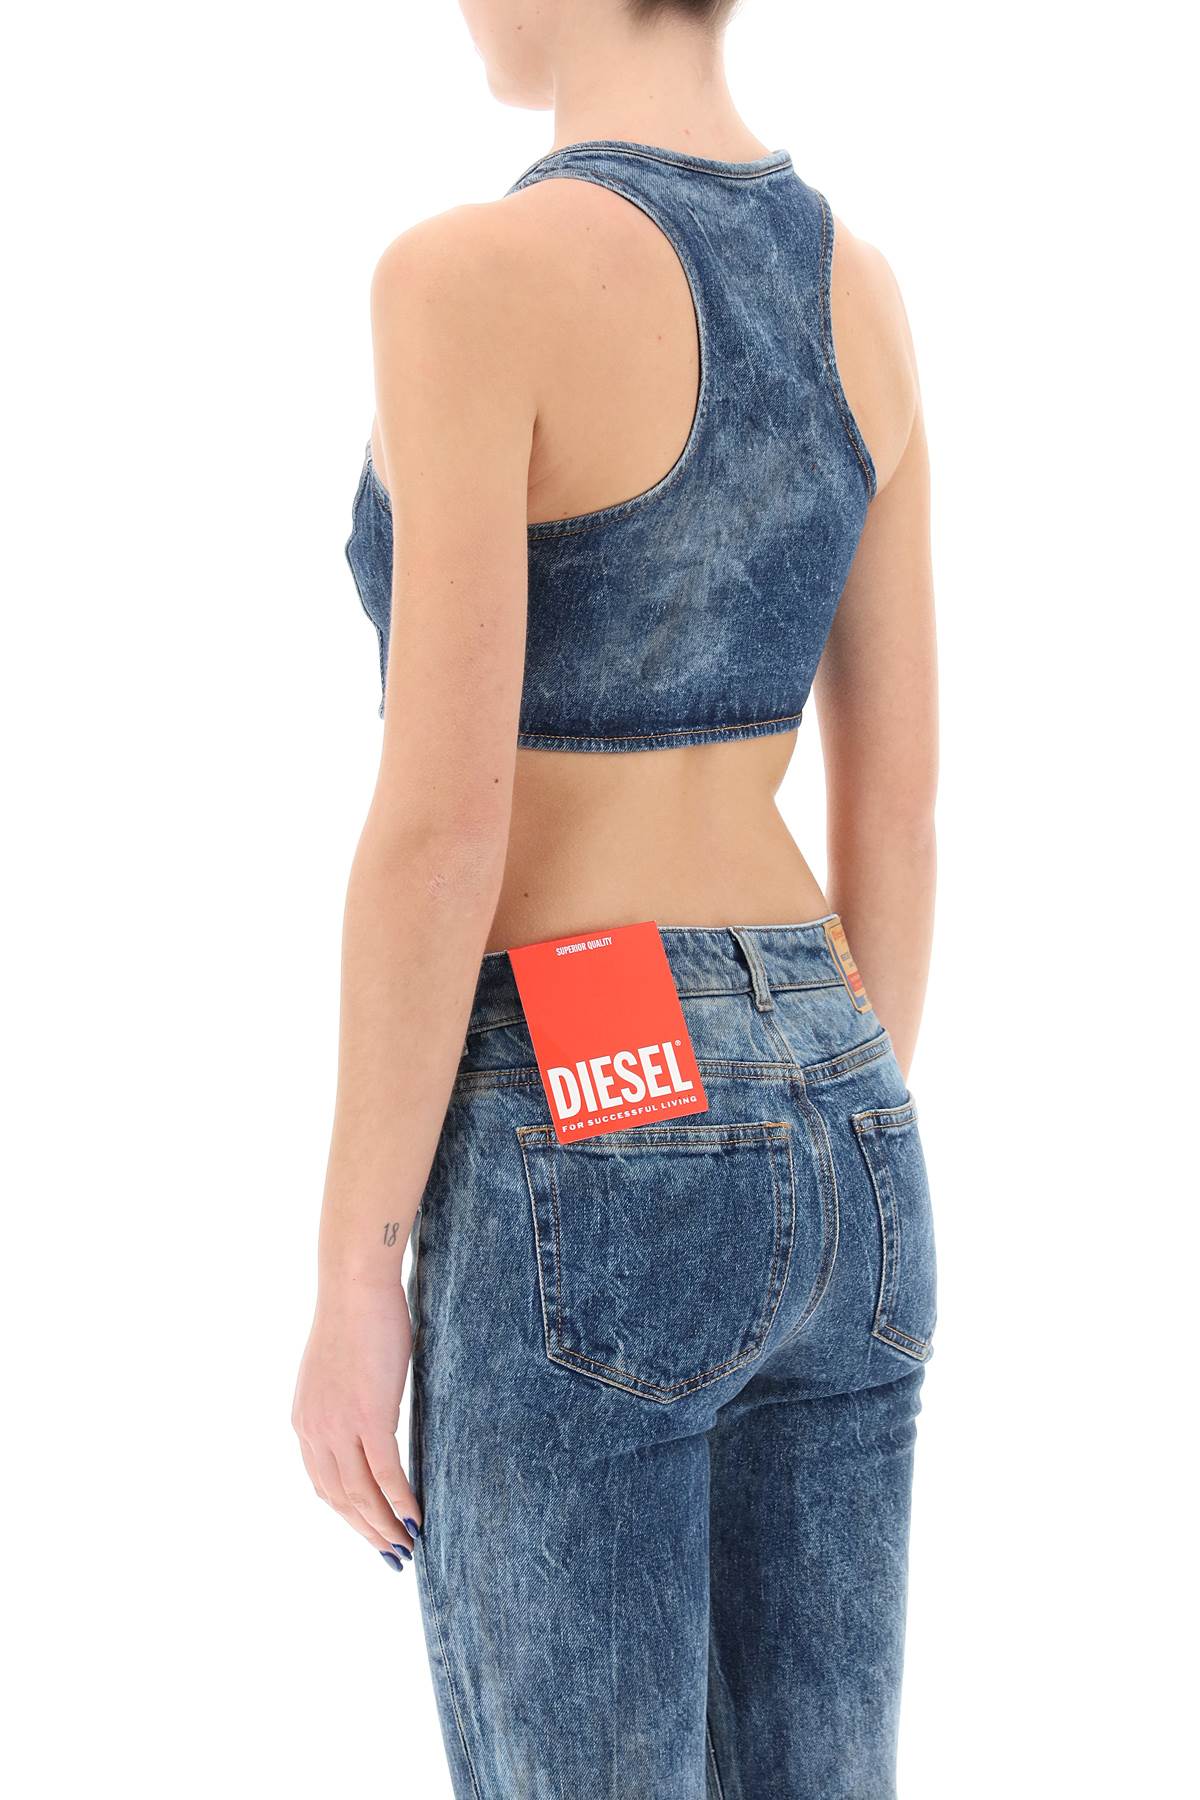 DIESEL Blue Denim Crop Top with Jewel Buckle for Women - SS24 Collection